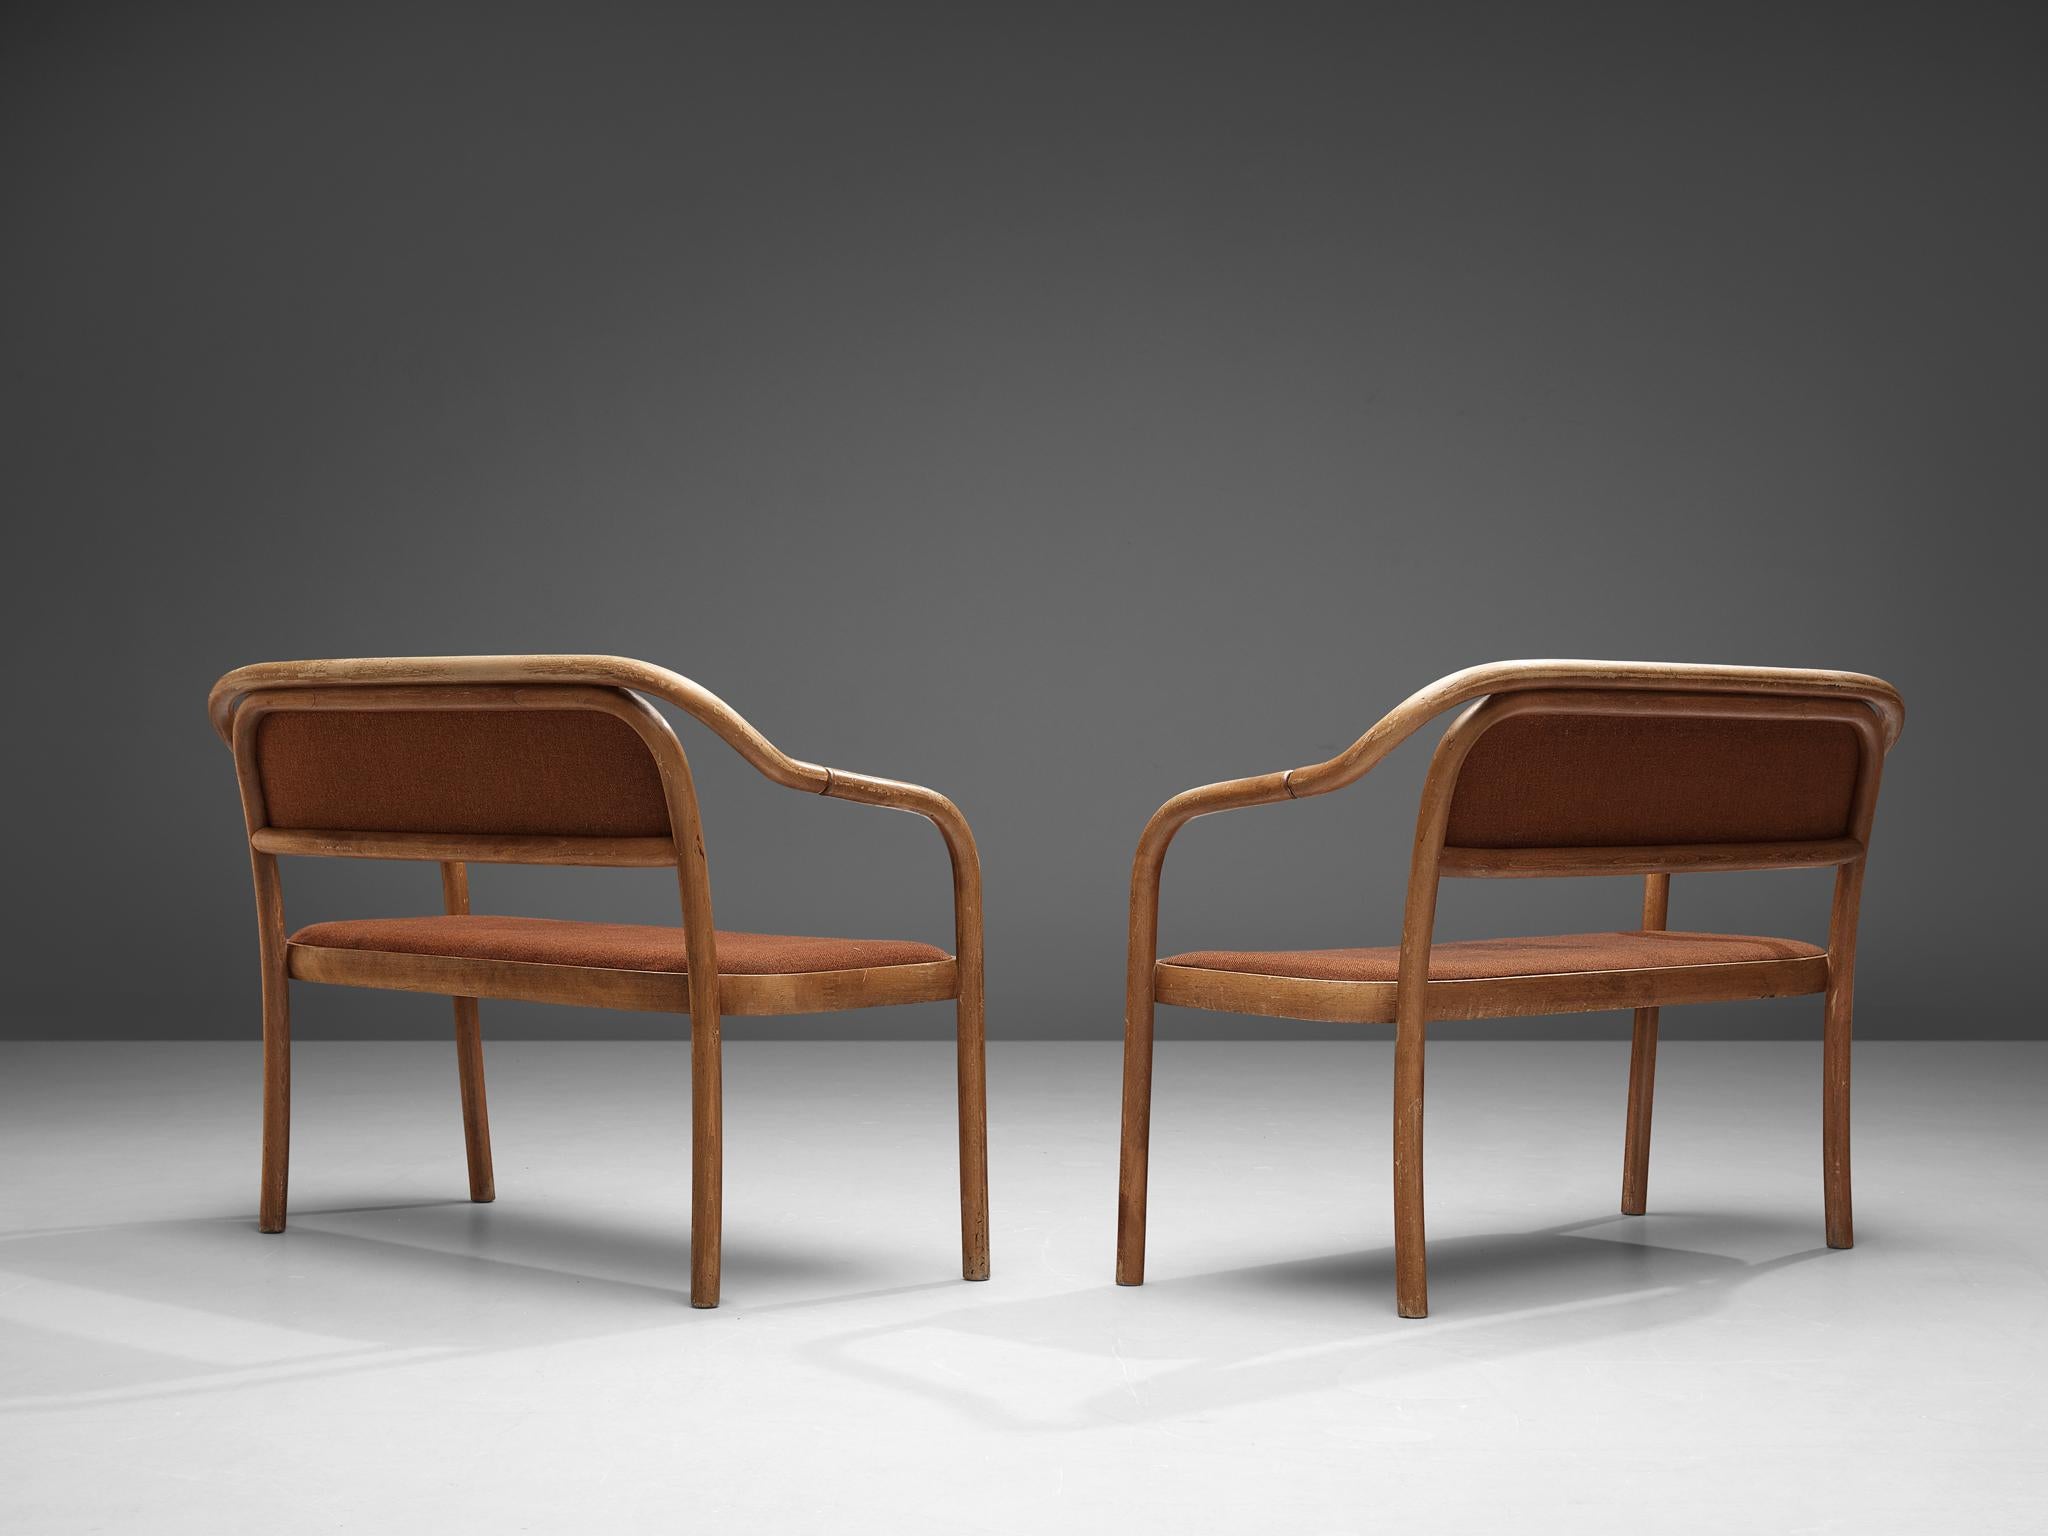 Czech Pair of Benches by Ton in Bentwood